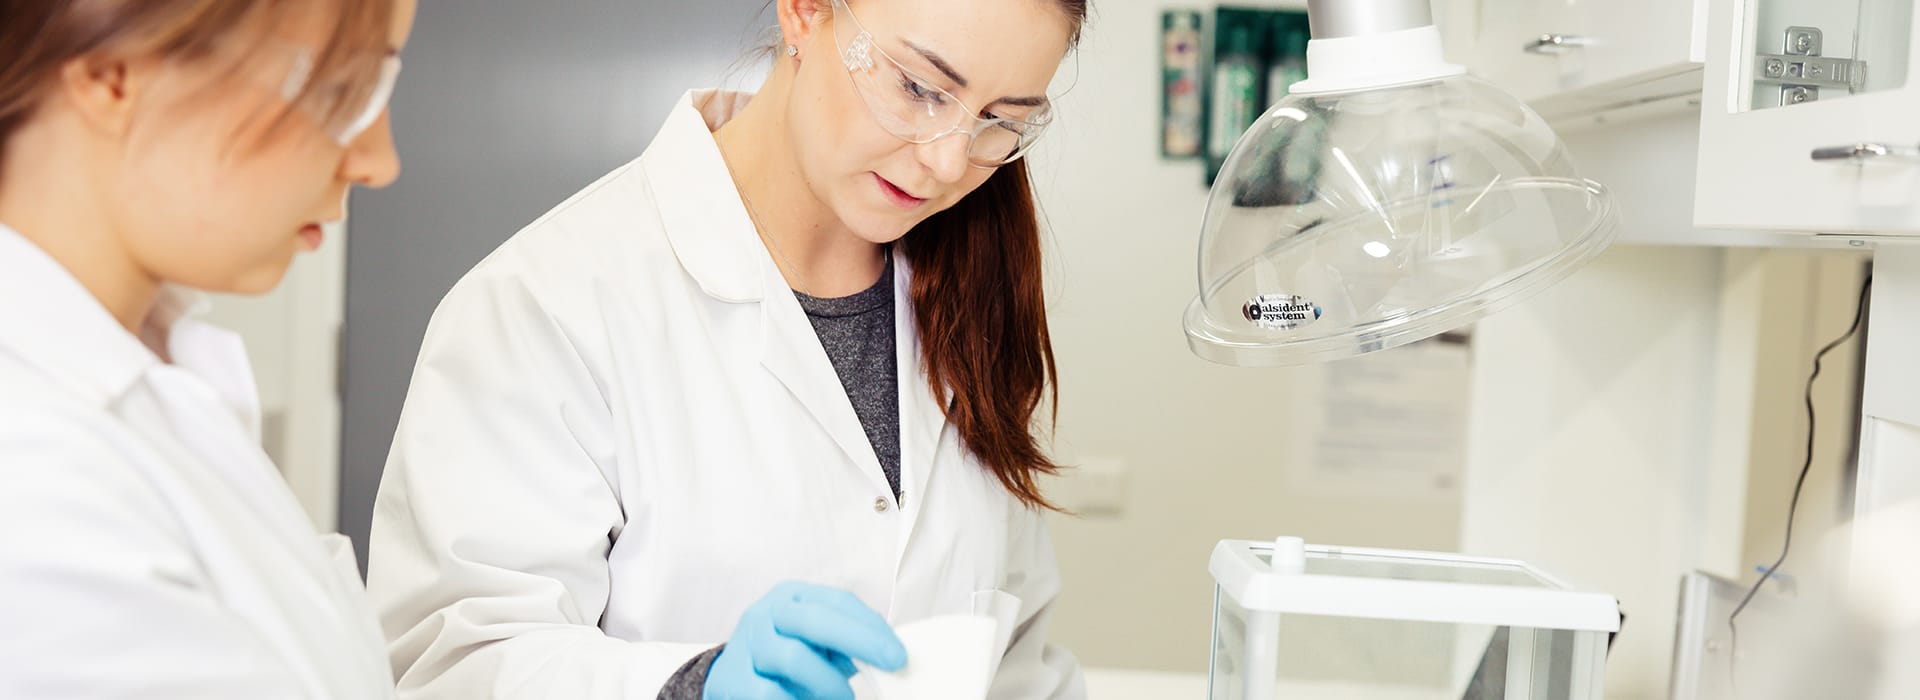 Two female students working in a laboratory.